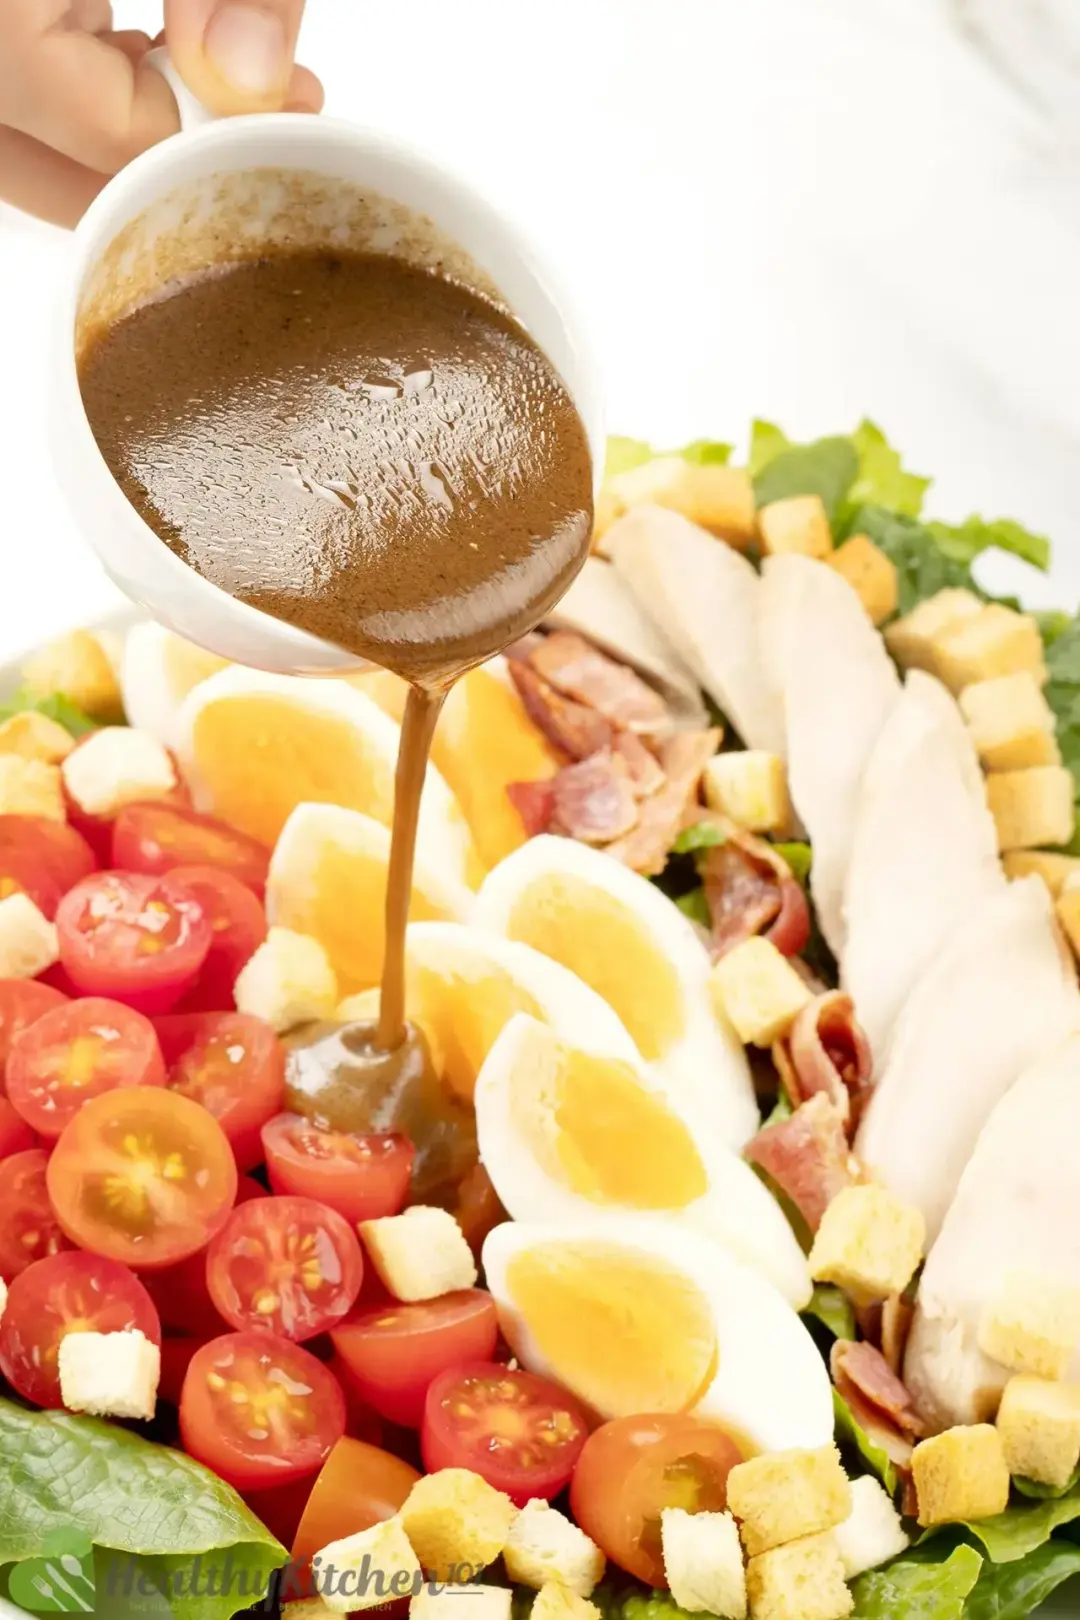 Caesar salad dressing in a glass jar pouring onto a plate of eggs, cherry tomatoes, sliced chicken, and other salad ingredients